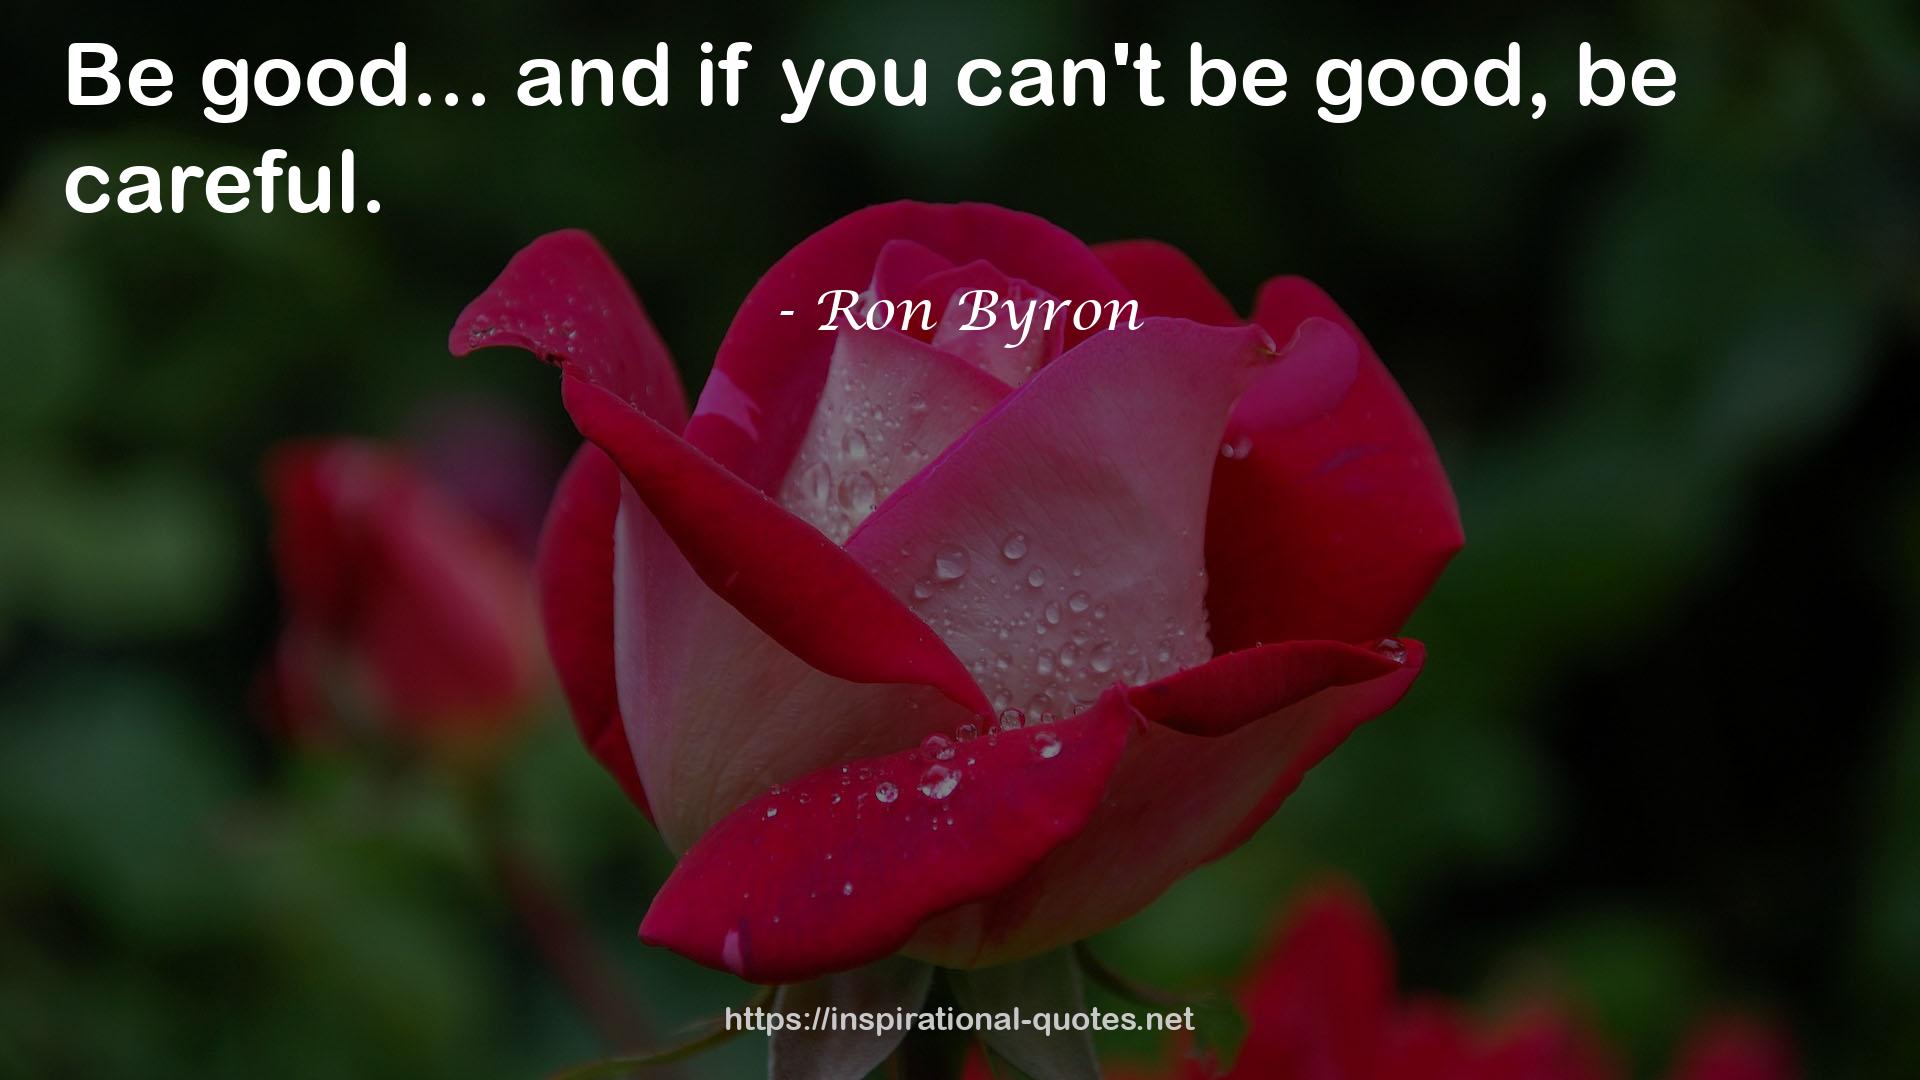 Ron Byron QUOTES